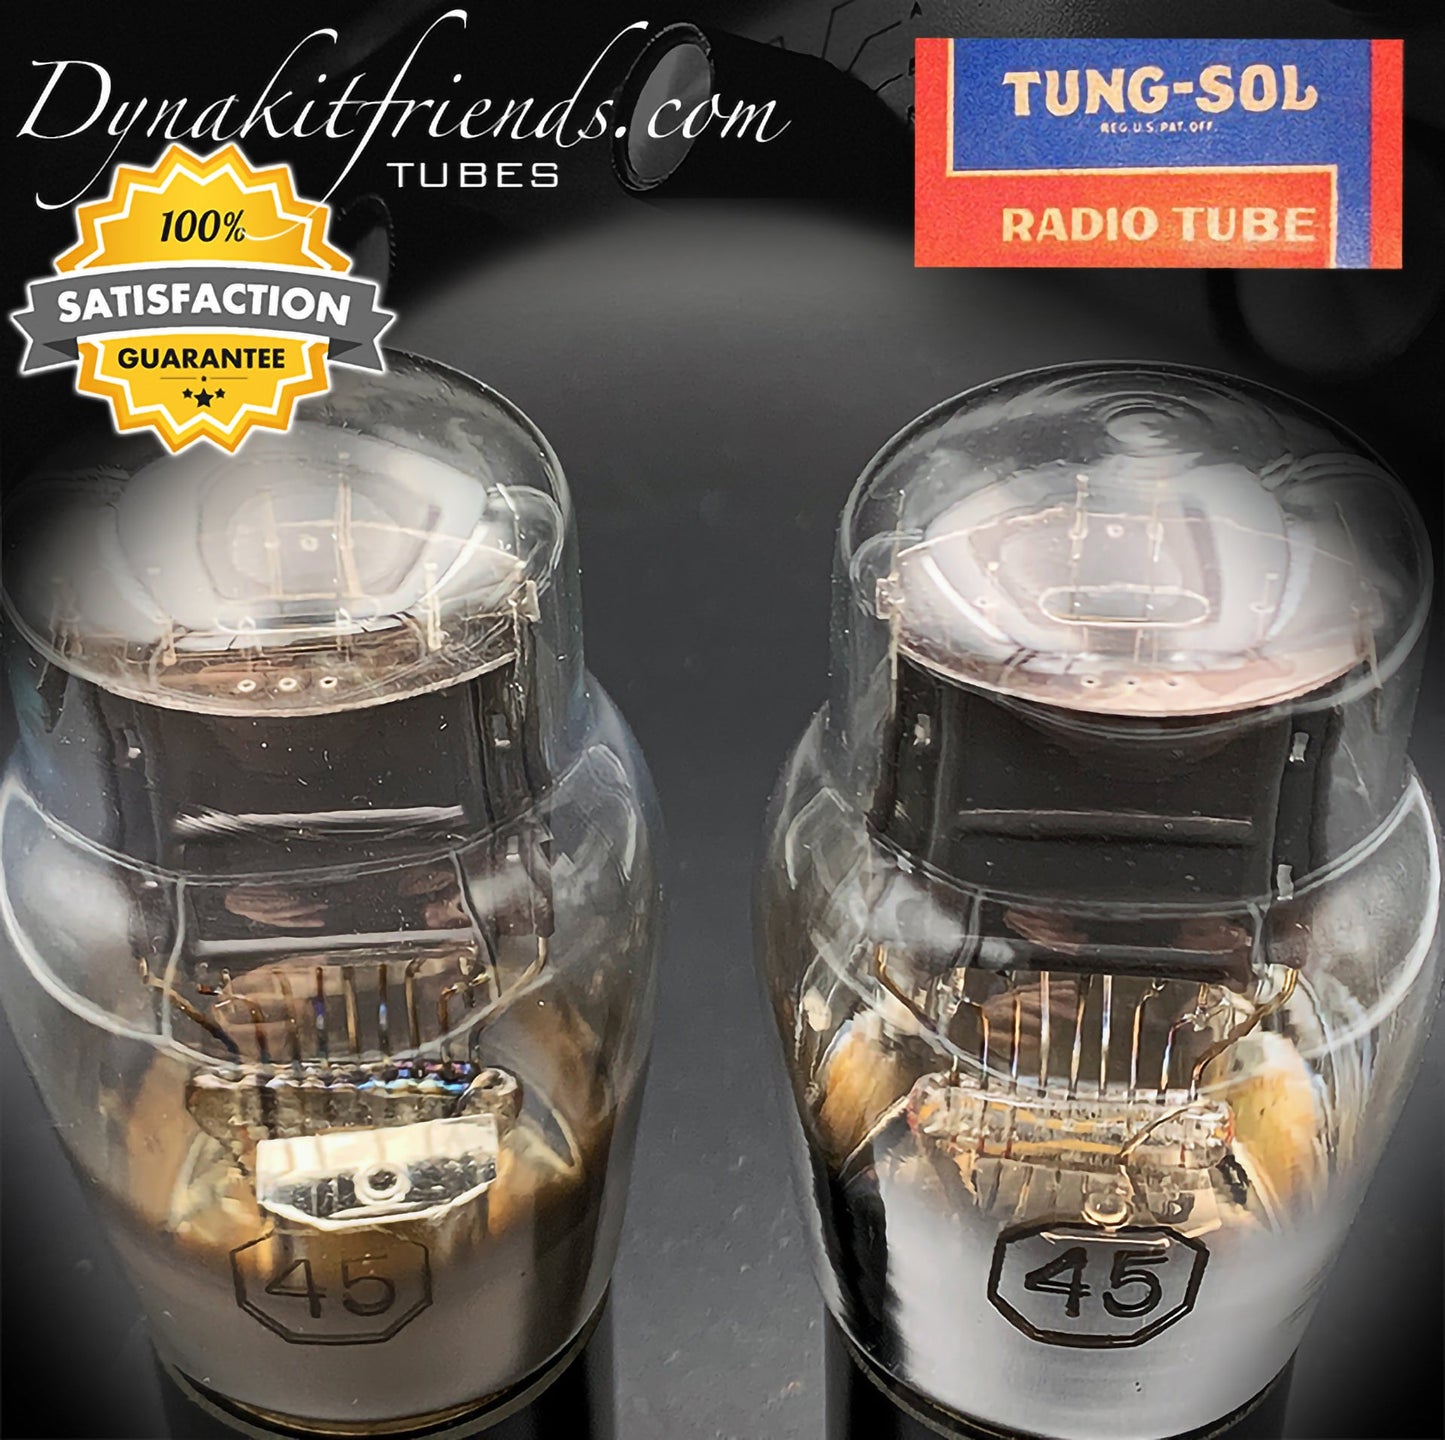 45 ST TUNG-SOL Black Plates Foil Dimpled Getter Matched Pair Tubes Made in USA 1940's - Vacuum Tubes Treasures